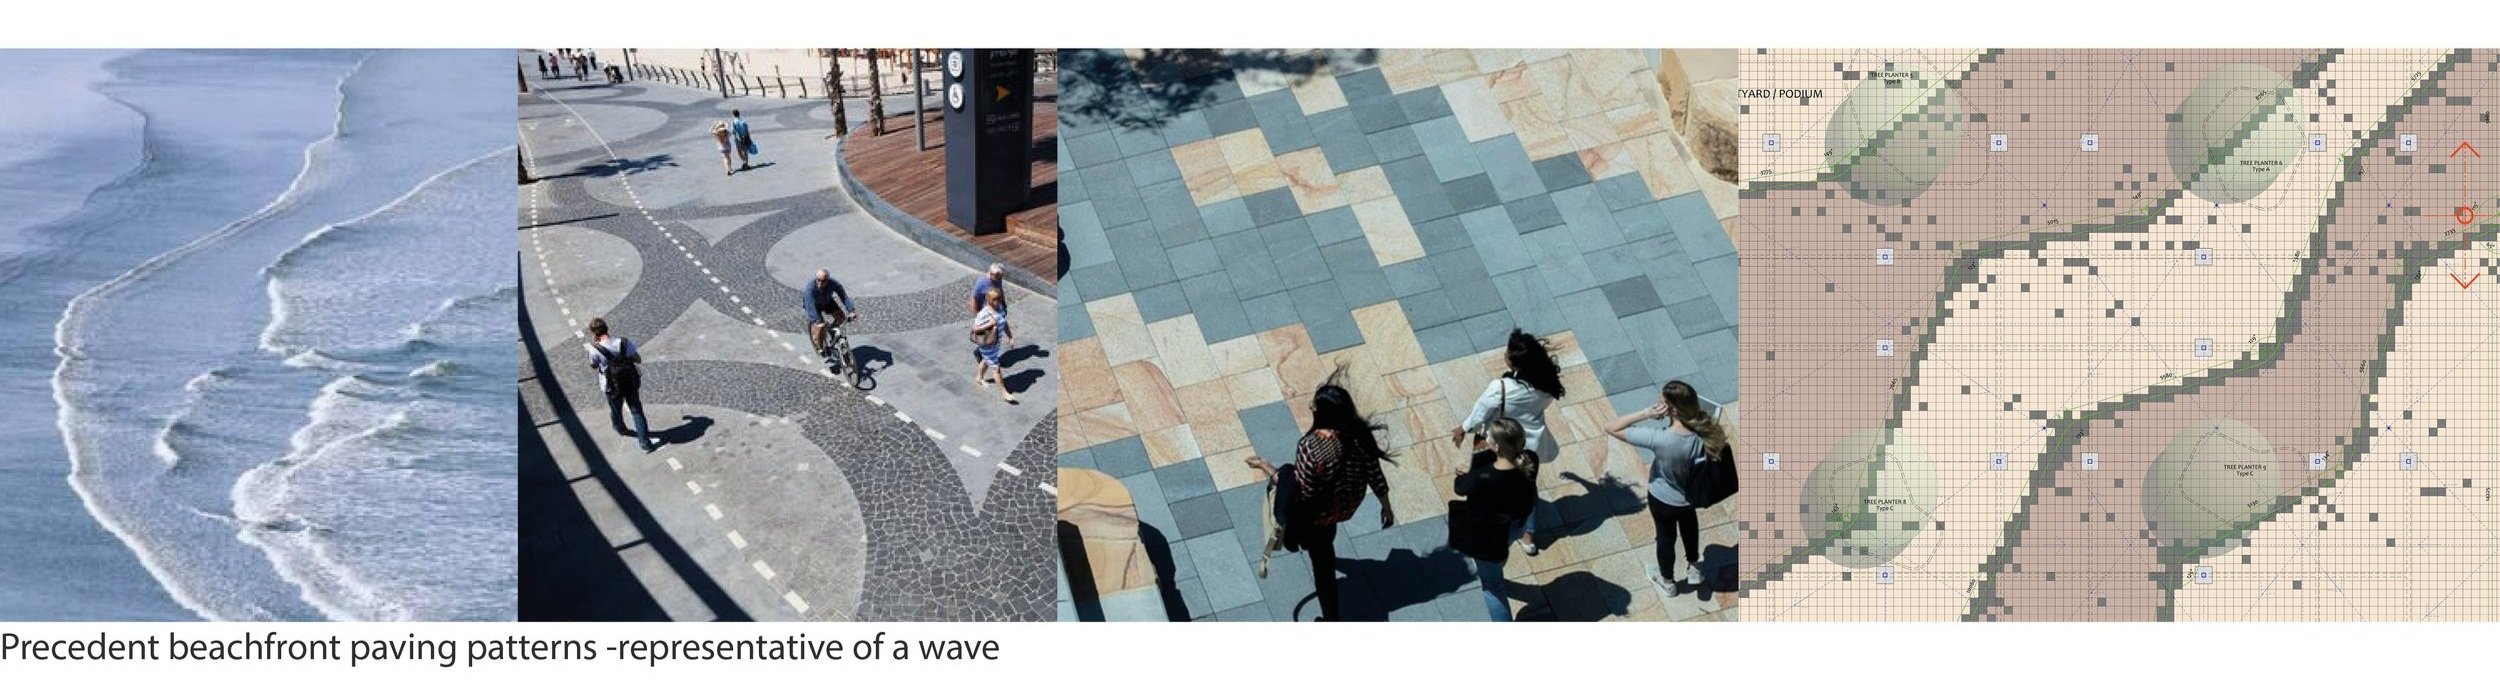  Between the central node, the station forecourt and the pavilion, the paving layout will follow a tidal/ wave ripple pattern that resembles and mimics the ocean movement along the coast. A darker clay paver is proposed to demarcate the ripple edge, 